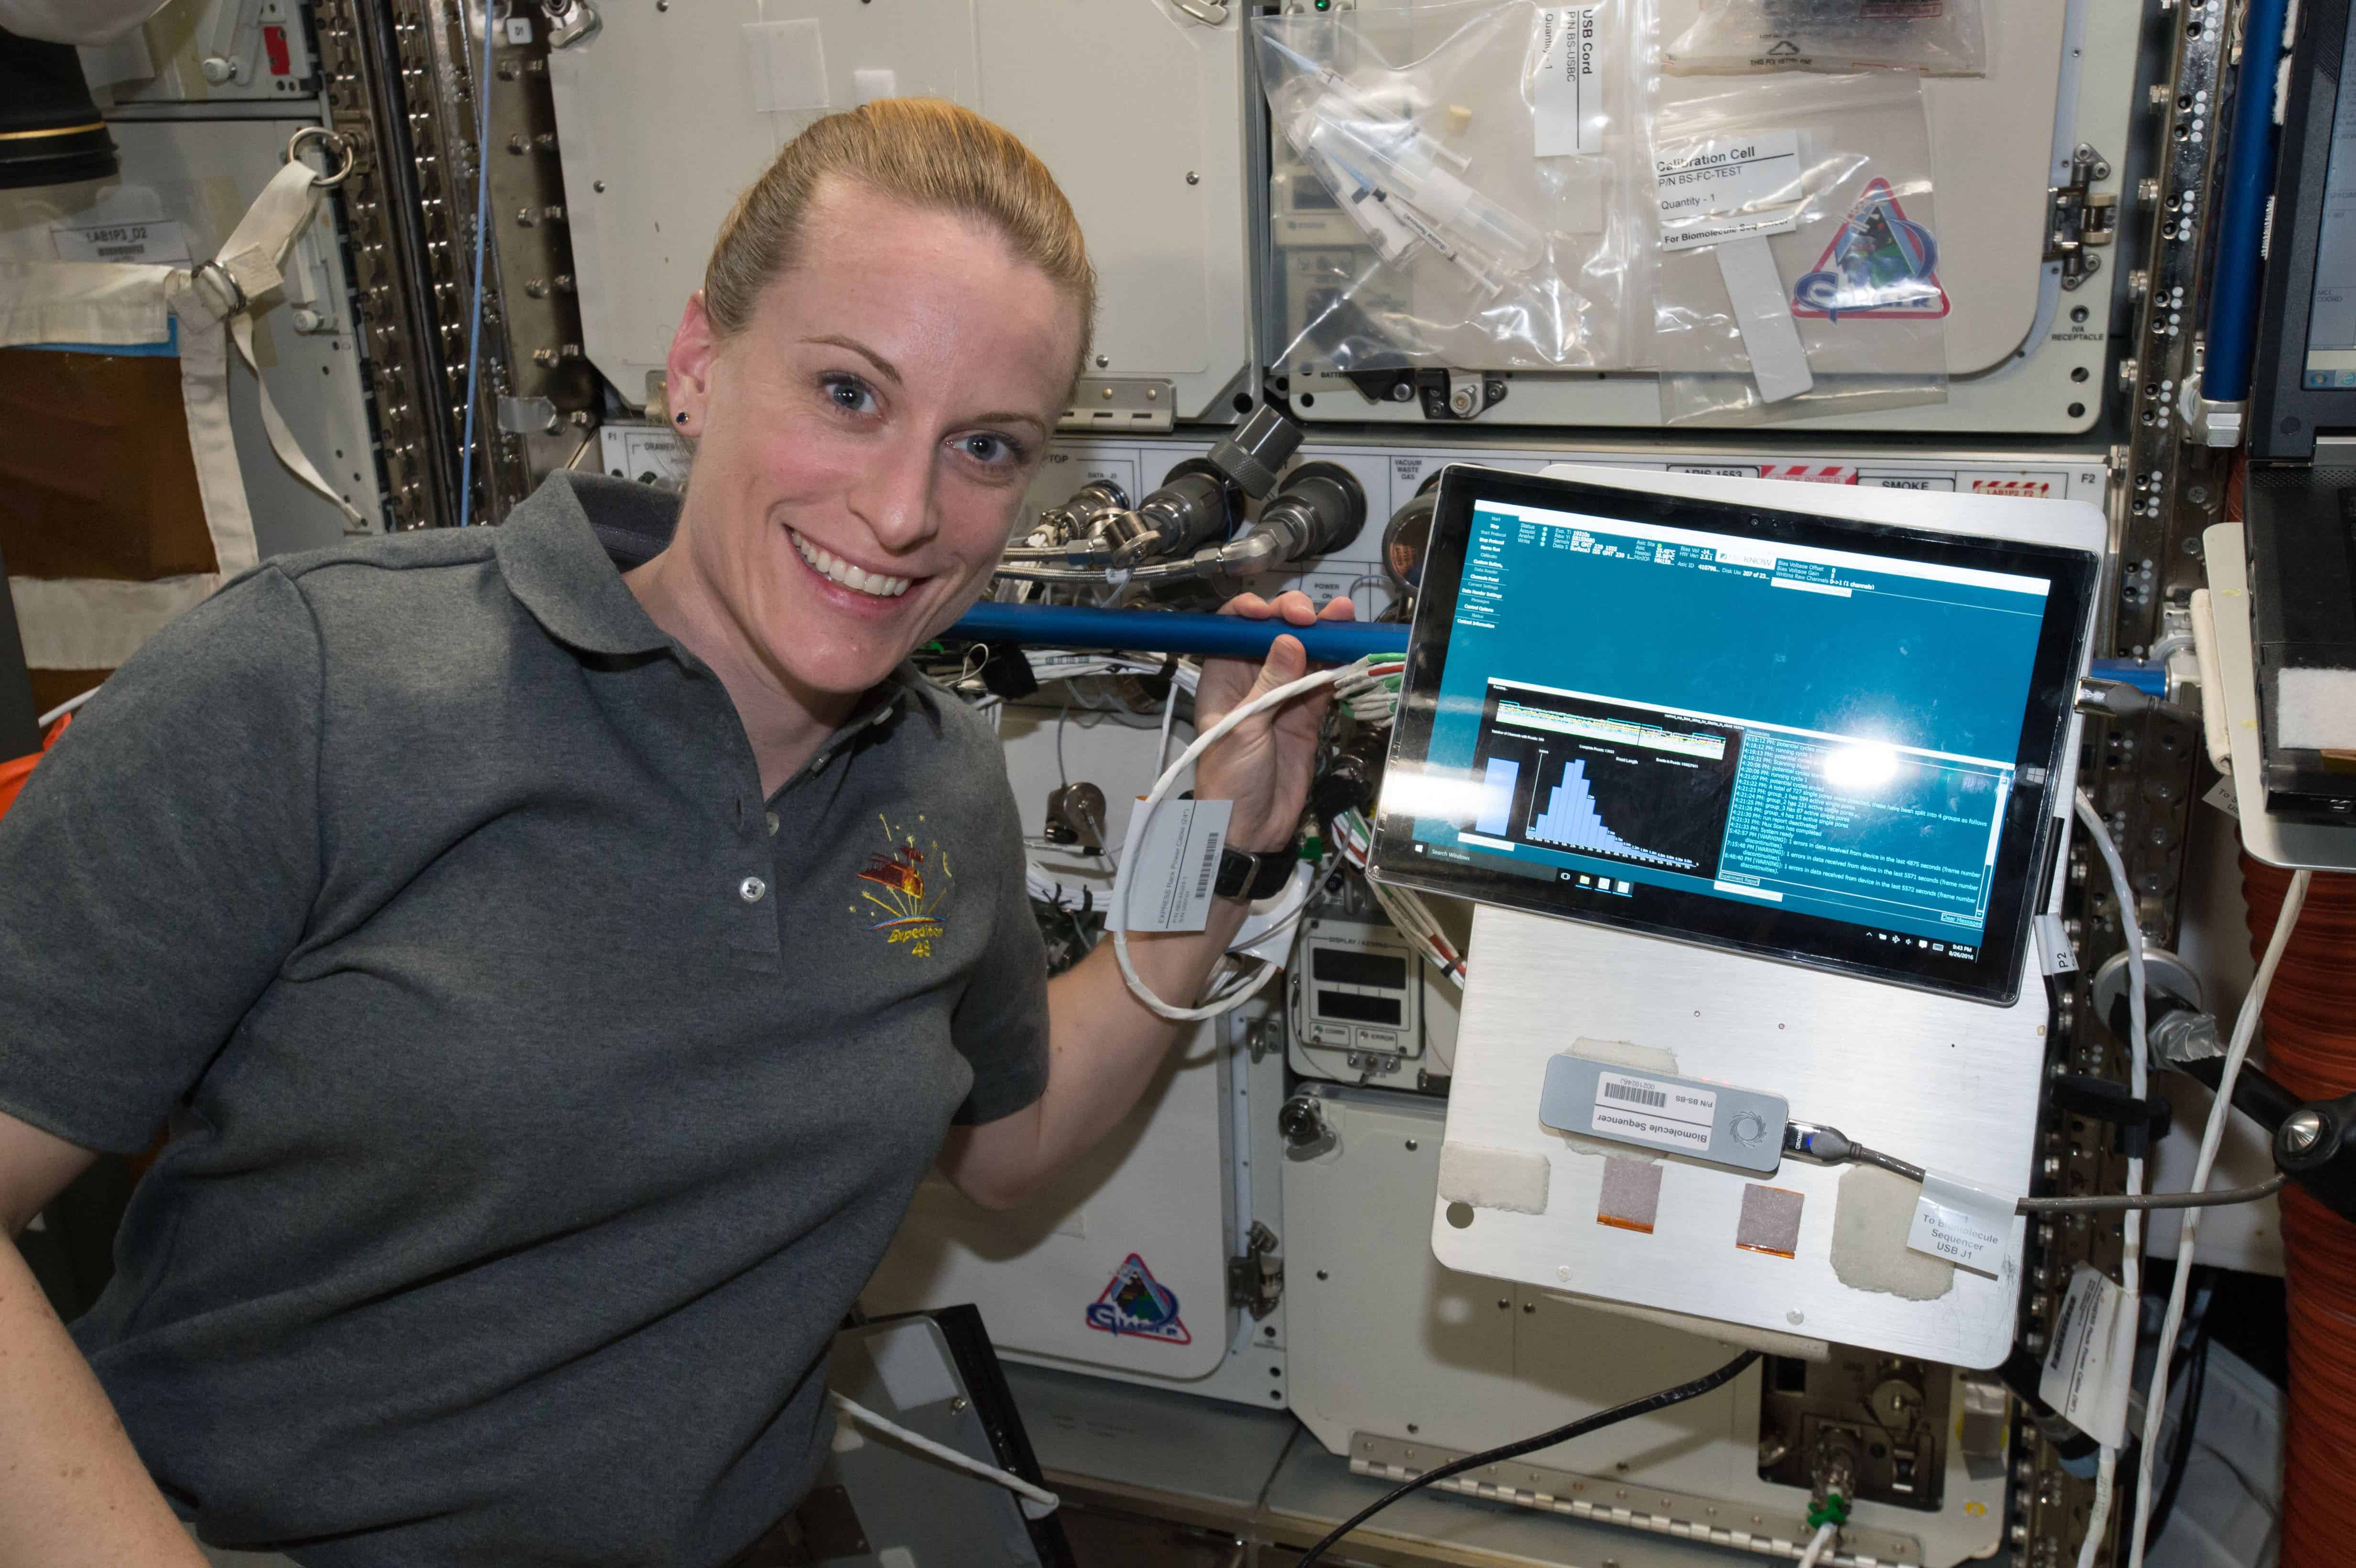 NASA astronaut Kate Rubins poses for a picture during the first sample initialization run of the Biomolecular Sequencer investigation. Credits: NASA.